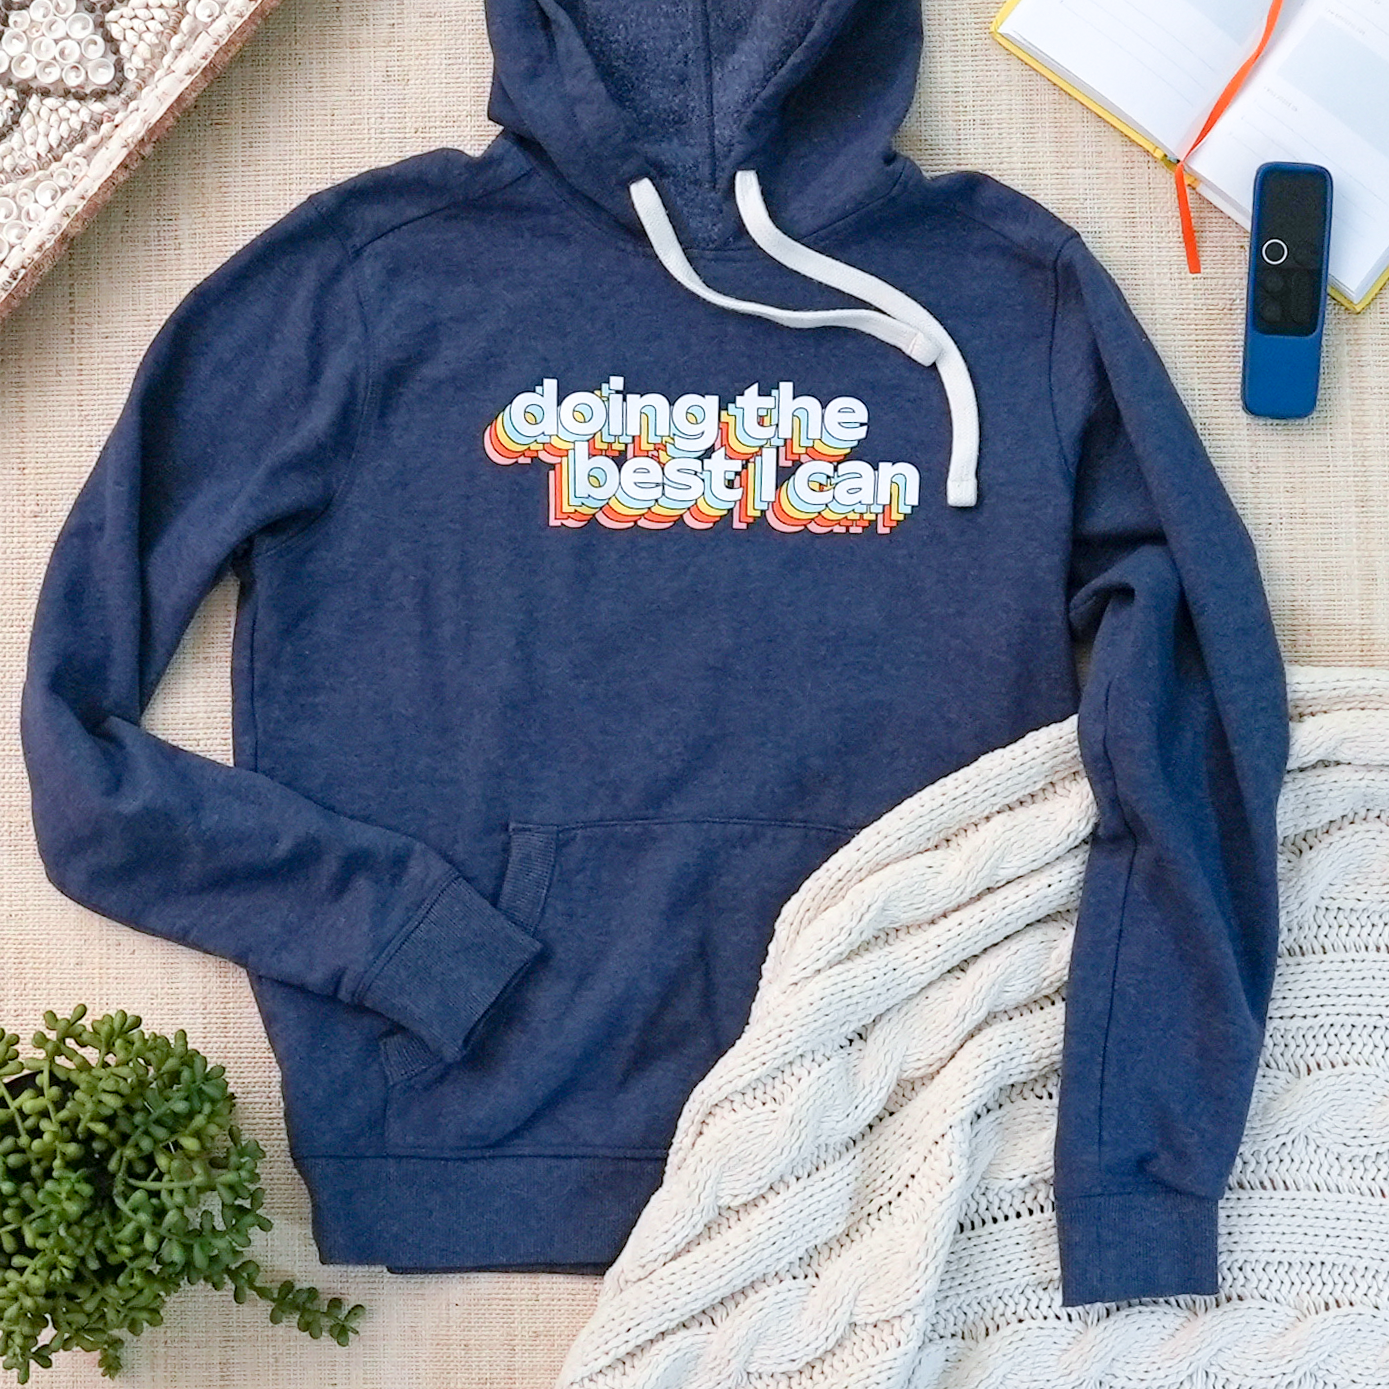 Best I Can Hoodie - 100% Recycled Fabric